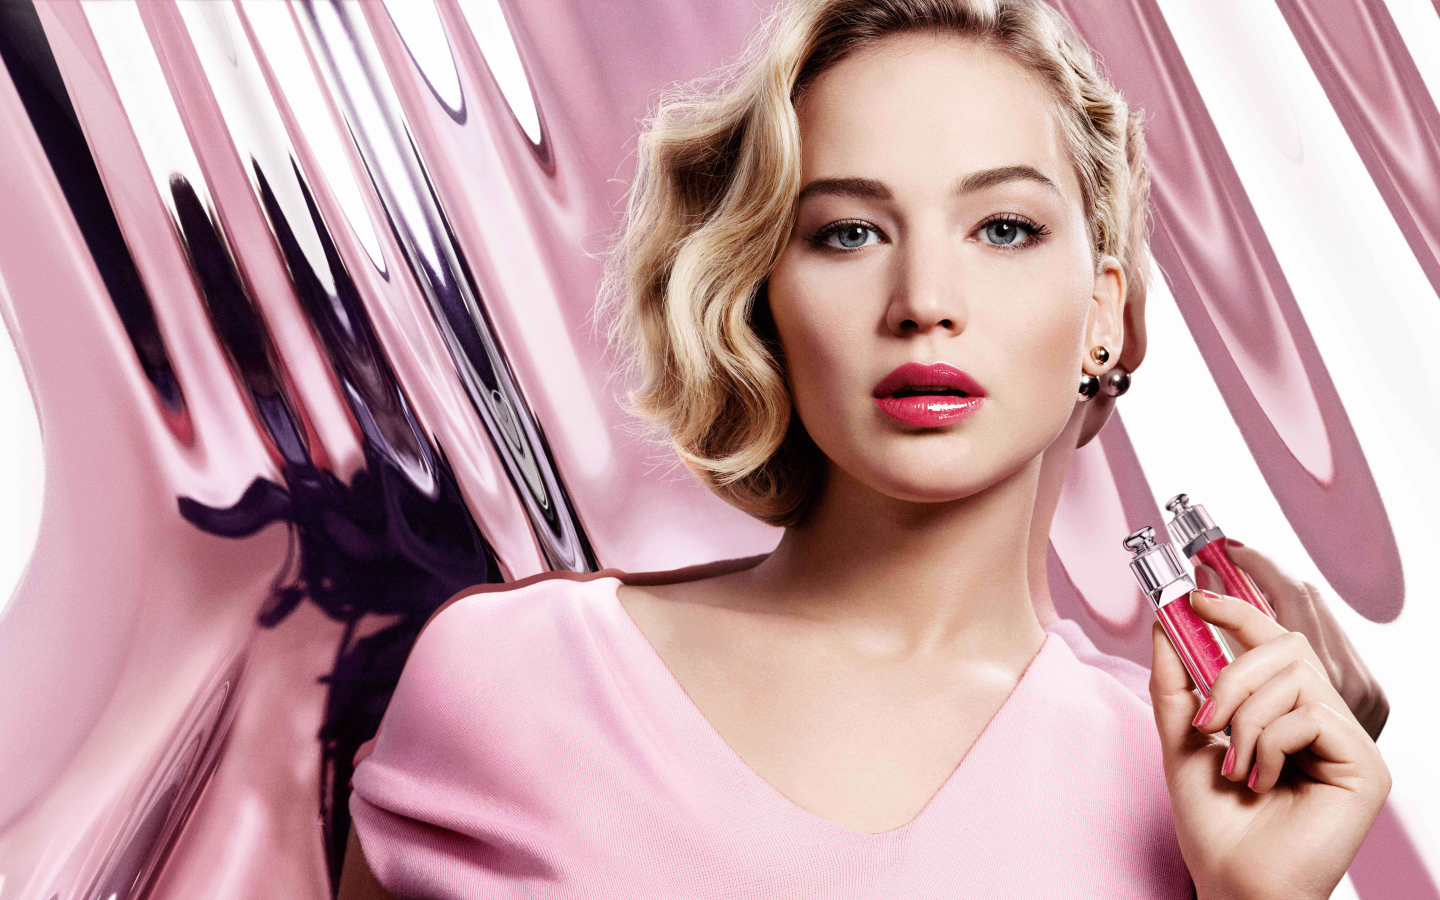 Popular actress Jennifer Lawrence with lip gloss in her hands